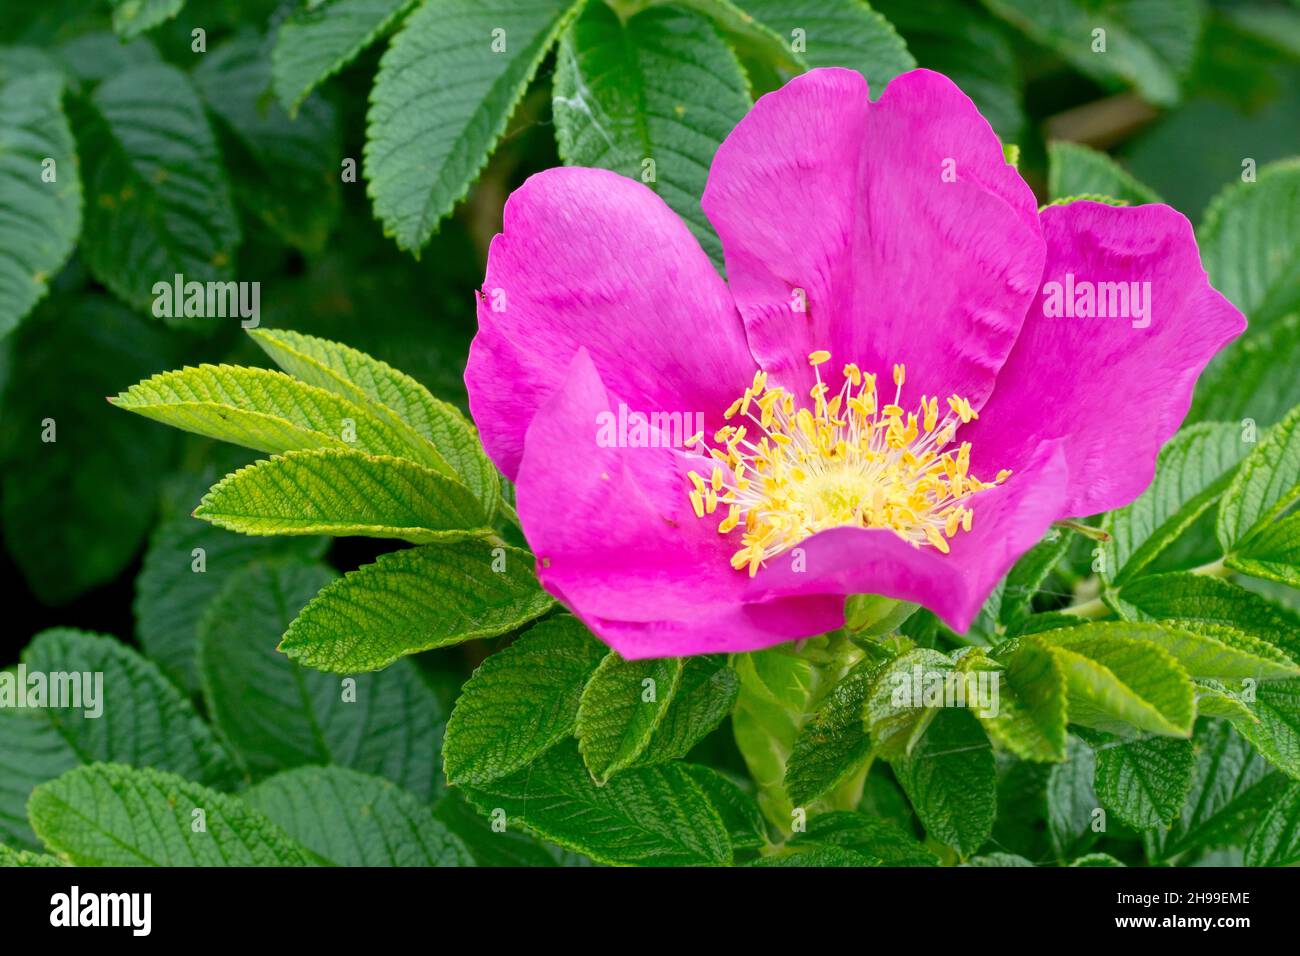 Wild Rose (rosa rugosa rubra), also known as Japanese Rose, close up showing a single open flower surrounded by the leaves of the plant. Stock Photo